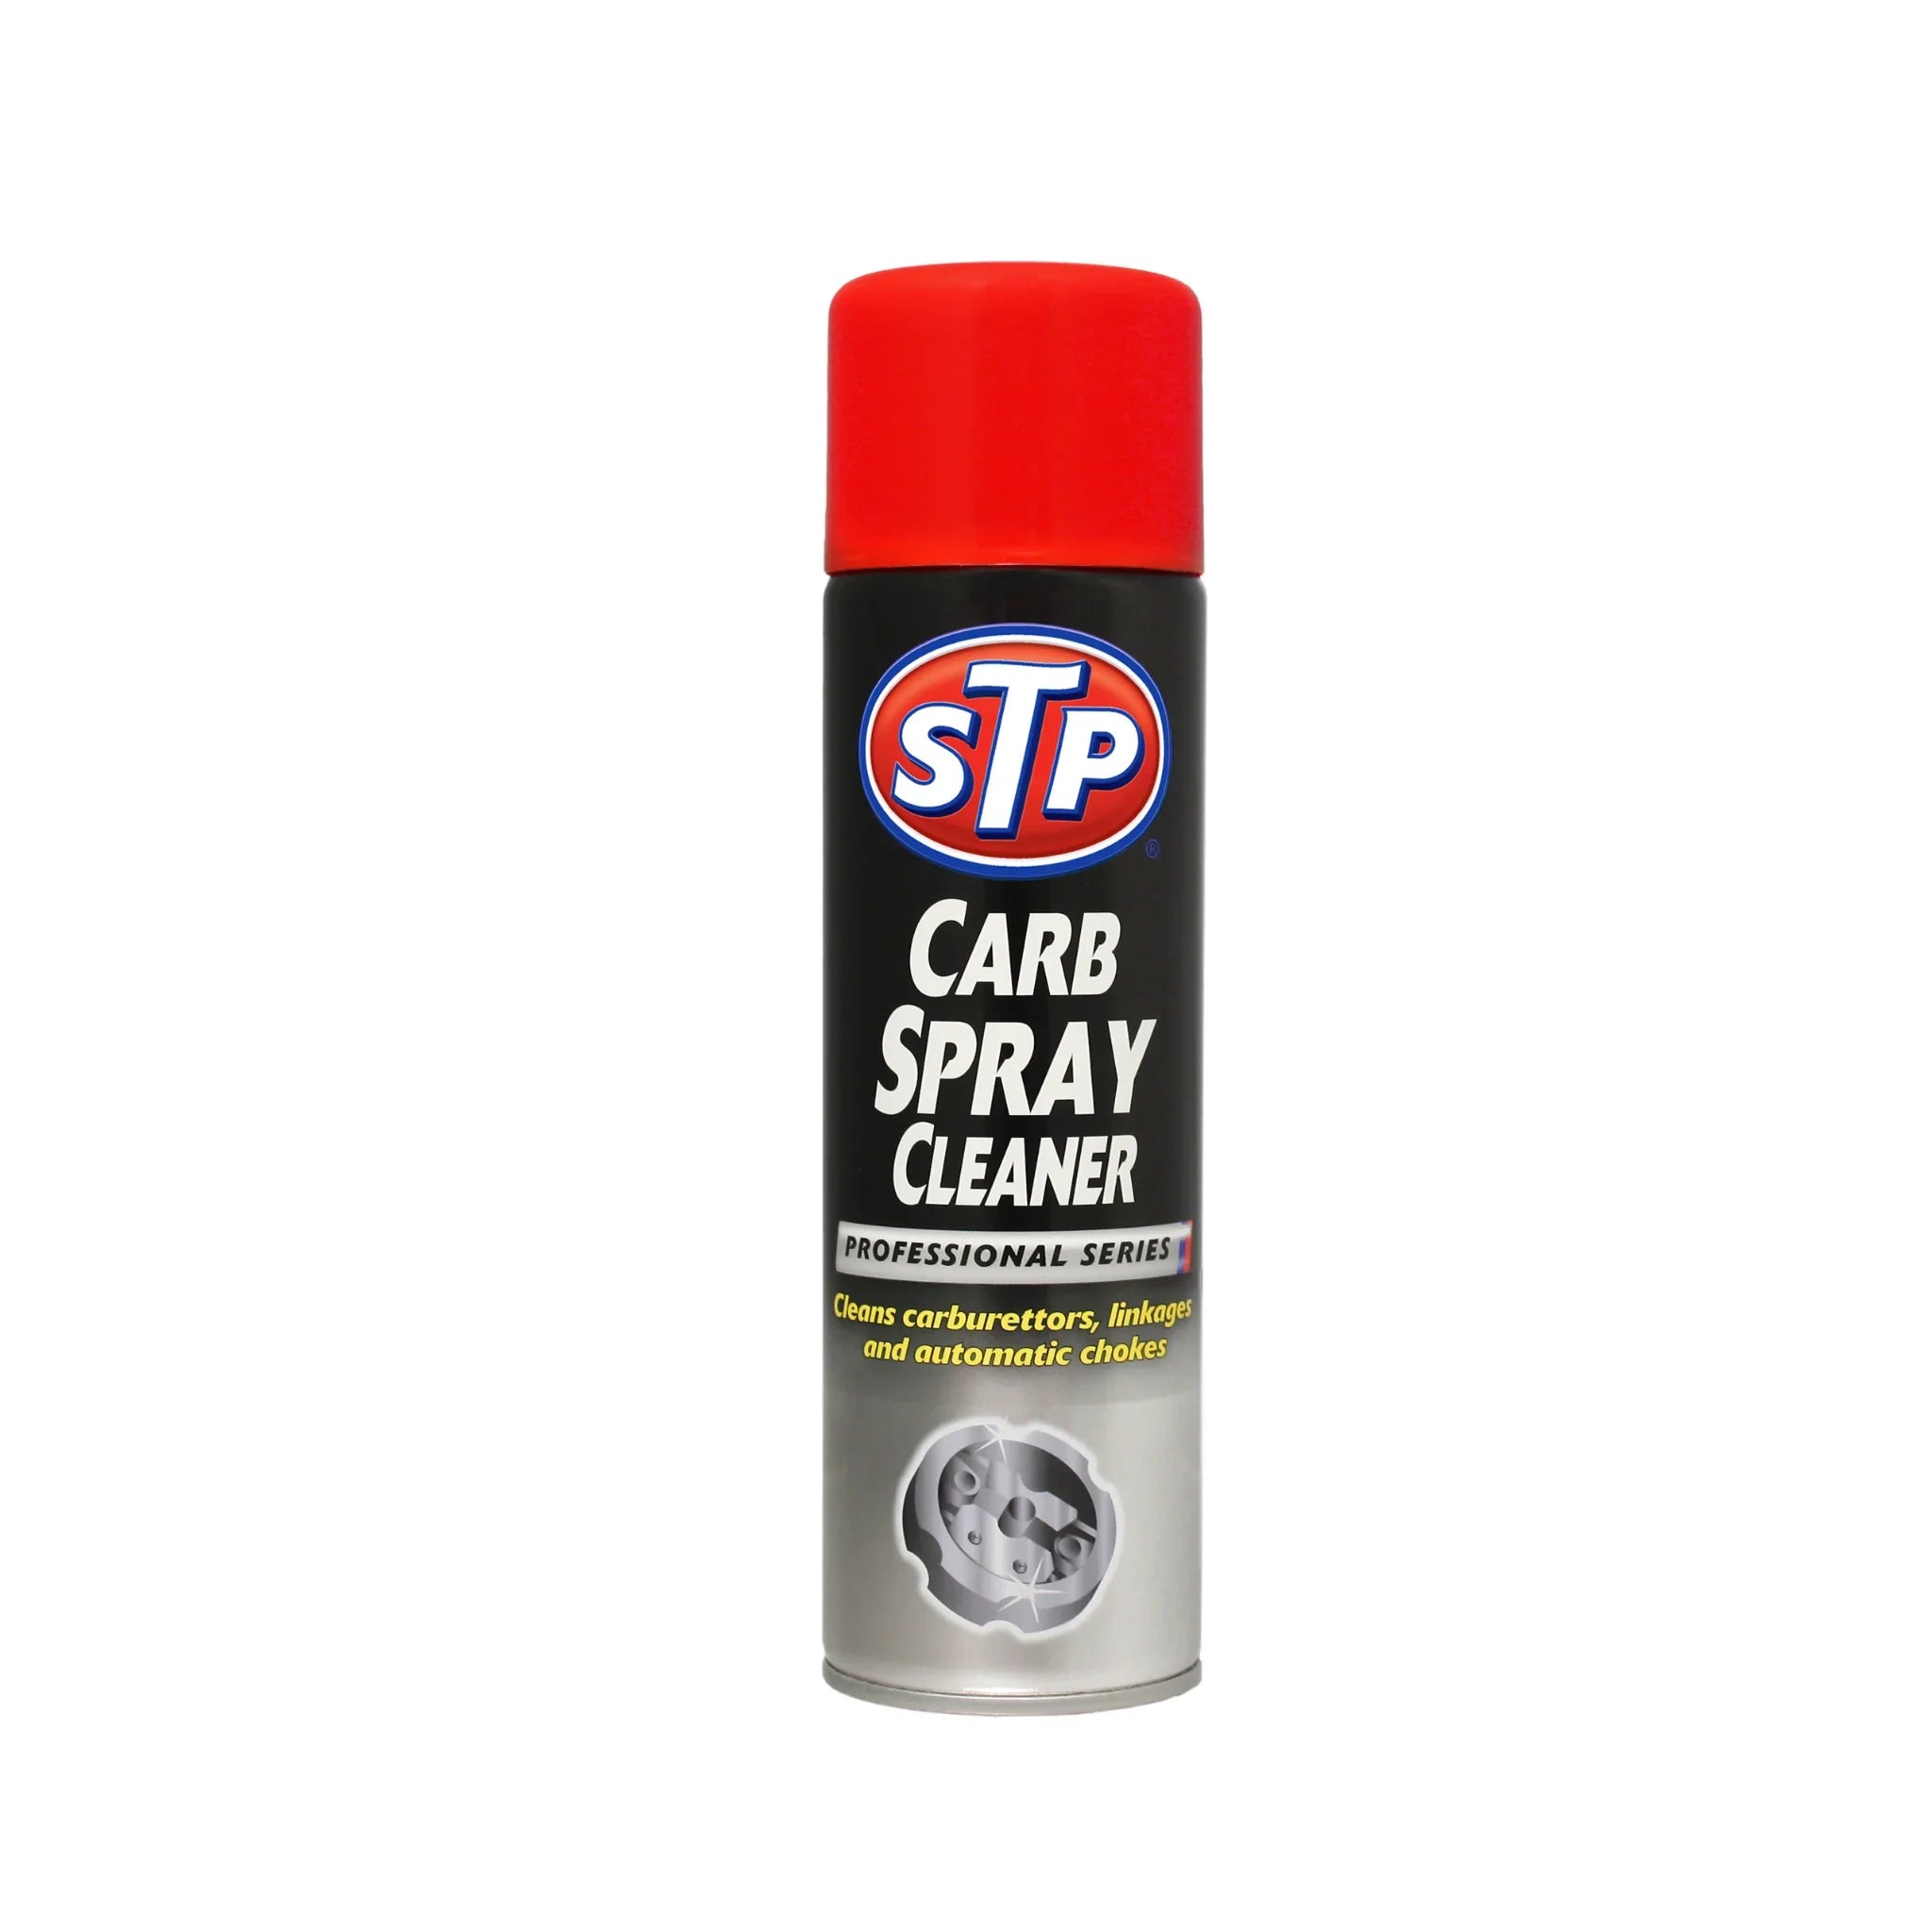 STP Professional Carb Spray Cleaner 500ml